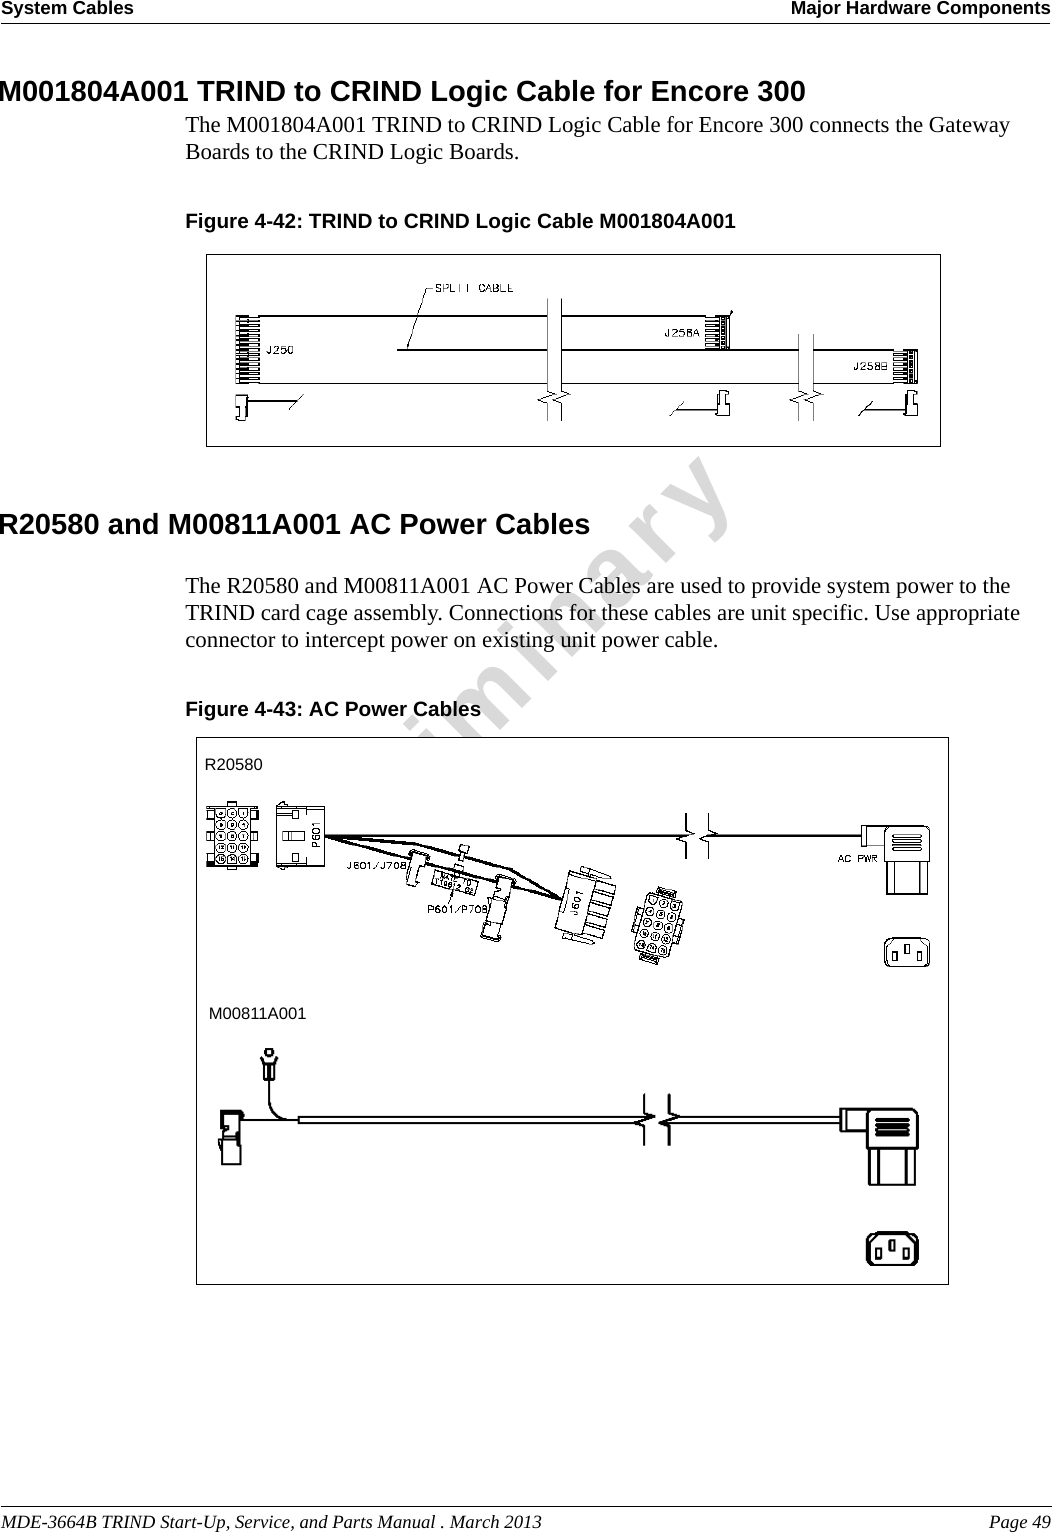 MDE-3664B TRIND Start-Up, Service, and Parts Manual . March 2013 Page 49System Cables Major Hardware ComponentsPreliminaryM001804A001 TRIND to CRIND Logic Cable for Encore 300The M001804A001 TRIND to CRIND Logic Cable for Encore 300 connects the Gateway Boards to the CRIND Logic Boards.Figure 4-42: TRIND to CRIND Logic Cable M001804A001  R20580 and M00811A001 AC Power CablesThe R20580 and M00811A001 AC Power Cables are used to provide system power to the TRIND card cage assembly. Connections for these cables are unit specific. Use appropriate connector to intercept power on existing unit power cable.Figure 4-43: AC Power CablesR20580M00811A001